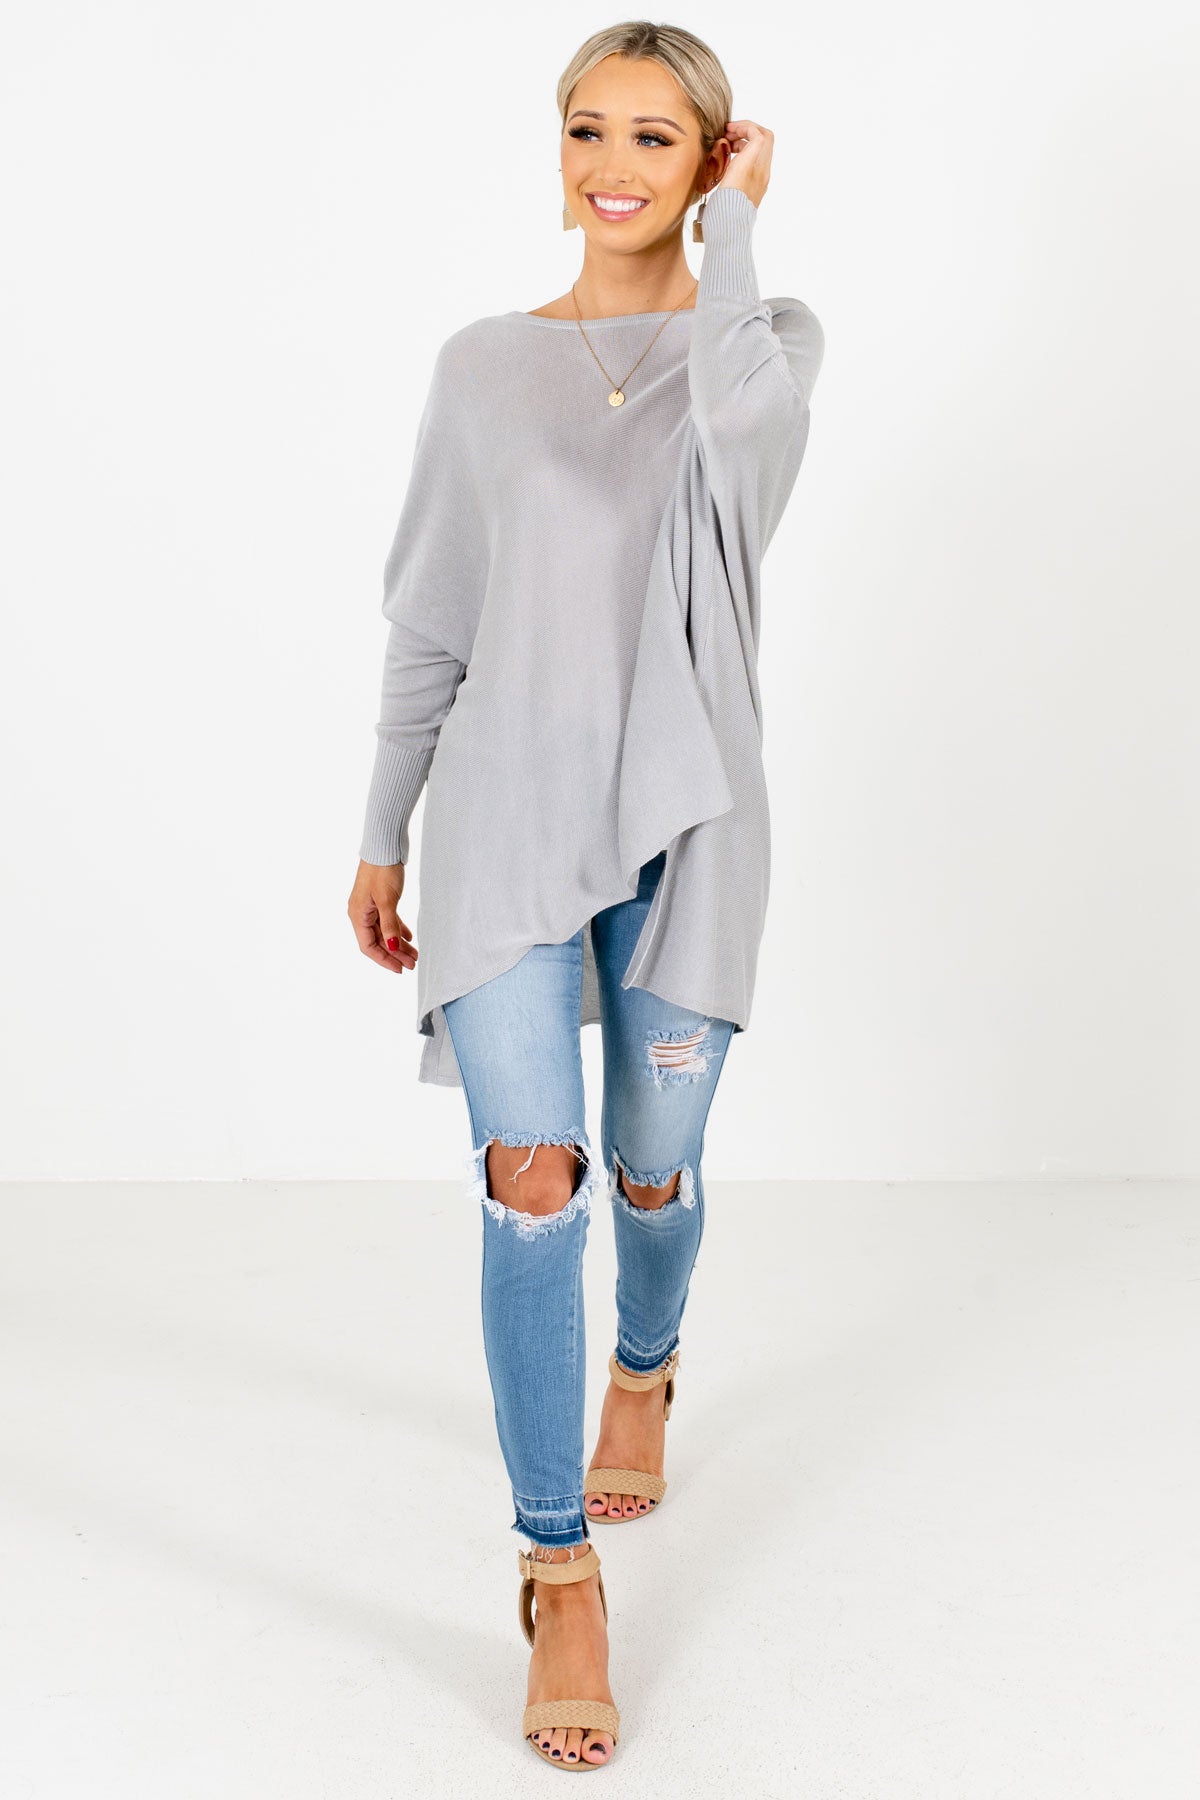 Women's Gray Casual Everyday Boutique Tops